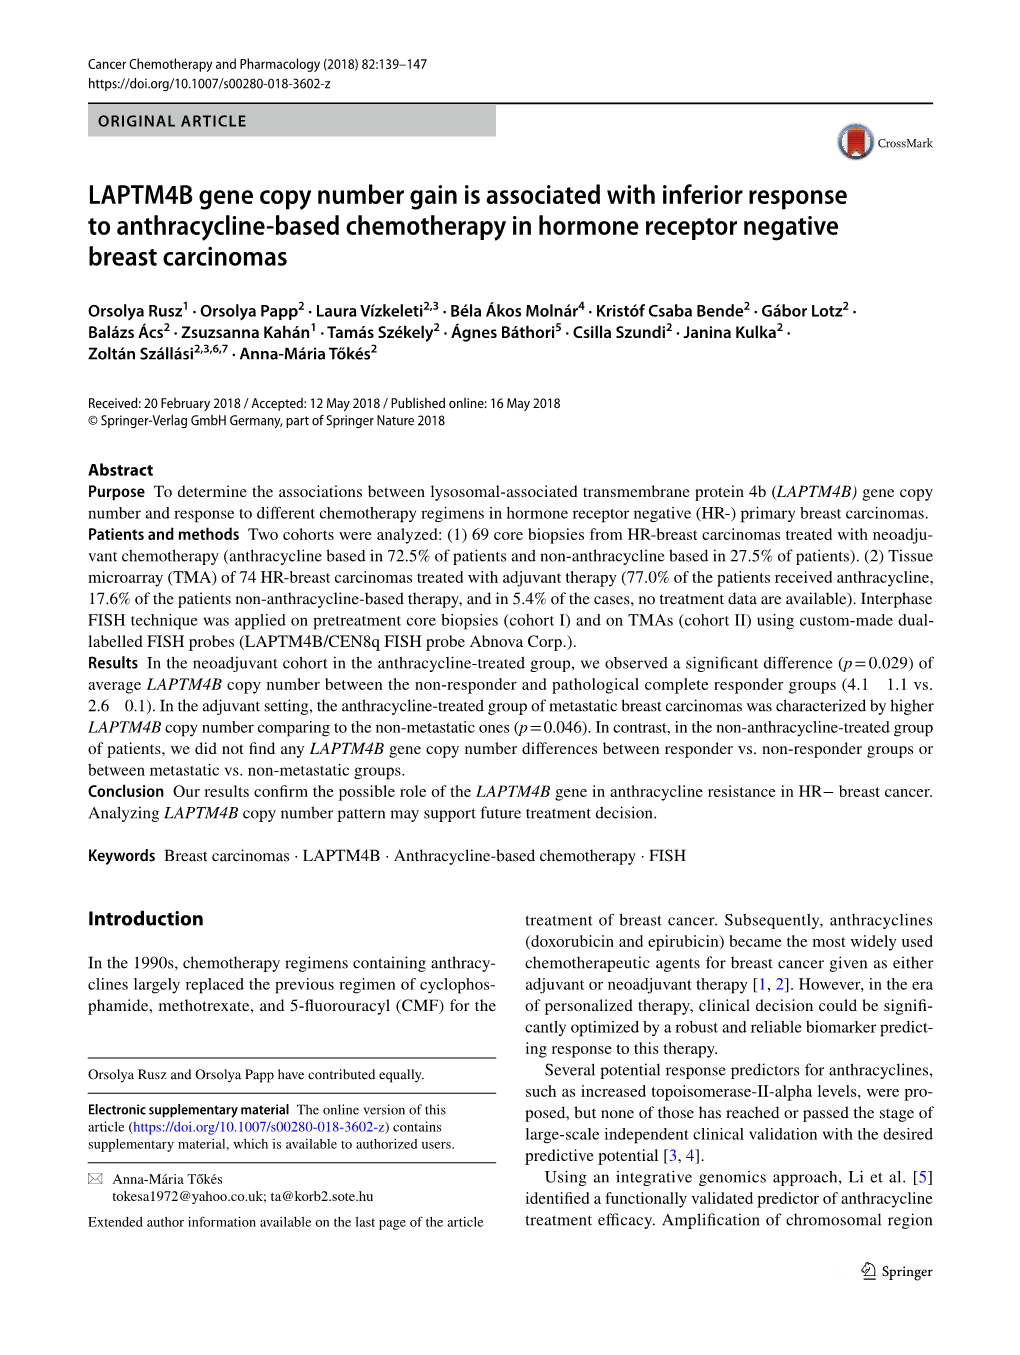 LAPTM4B Gene Copy Number Gain Is Associated with Inferior Response to Anthracycline-Based Chemotherapy in Hormone Receptor Negative Breast Carcinomas